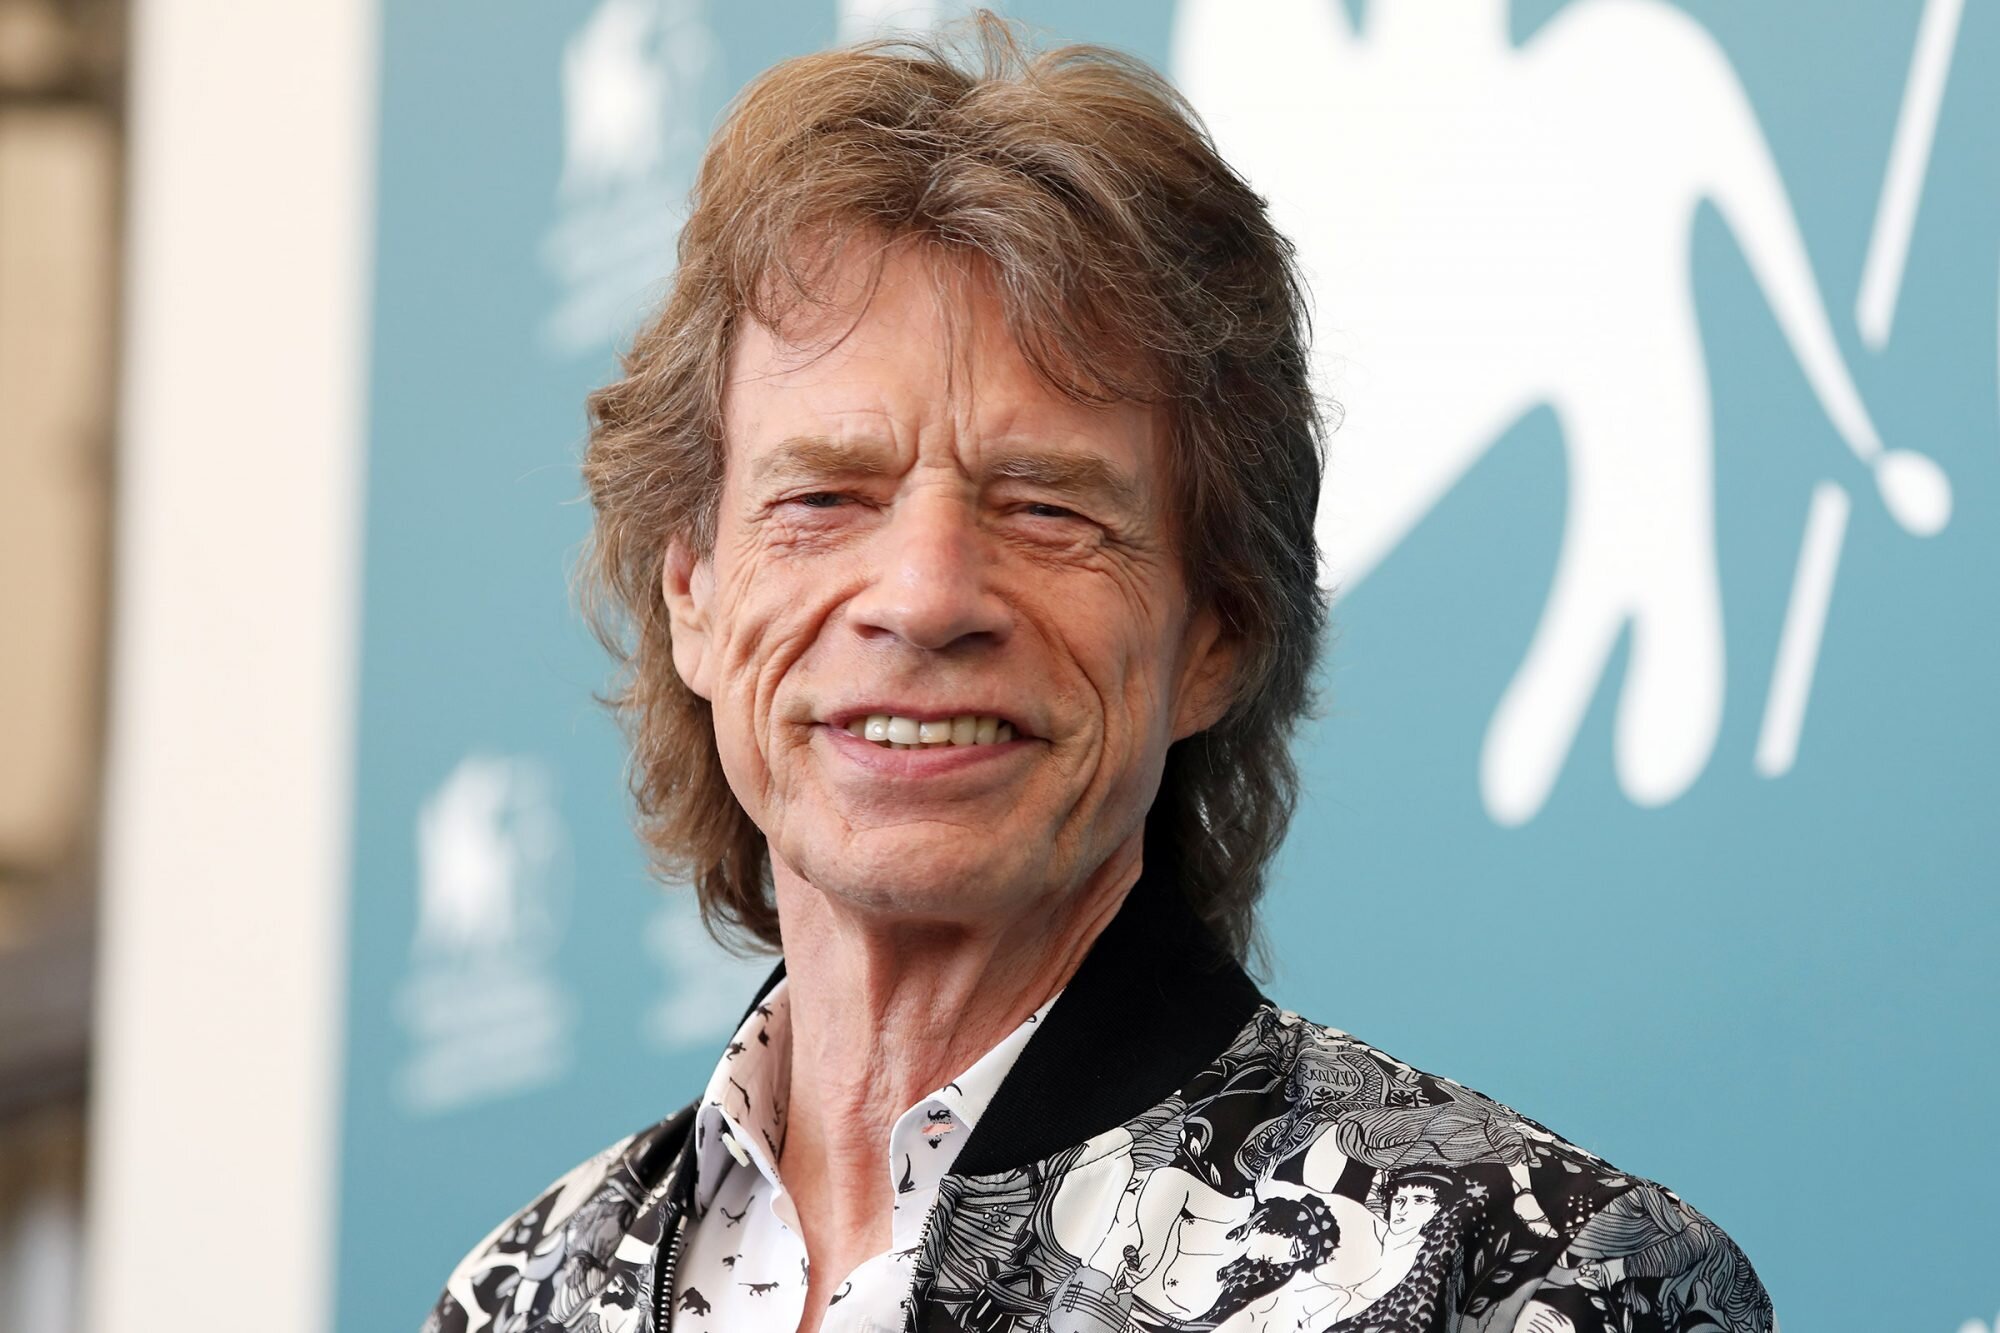 Mick Jagger Shook Thinking He Is Next To Die Amid Heart Problems And Upcoming Tour!